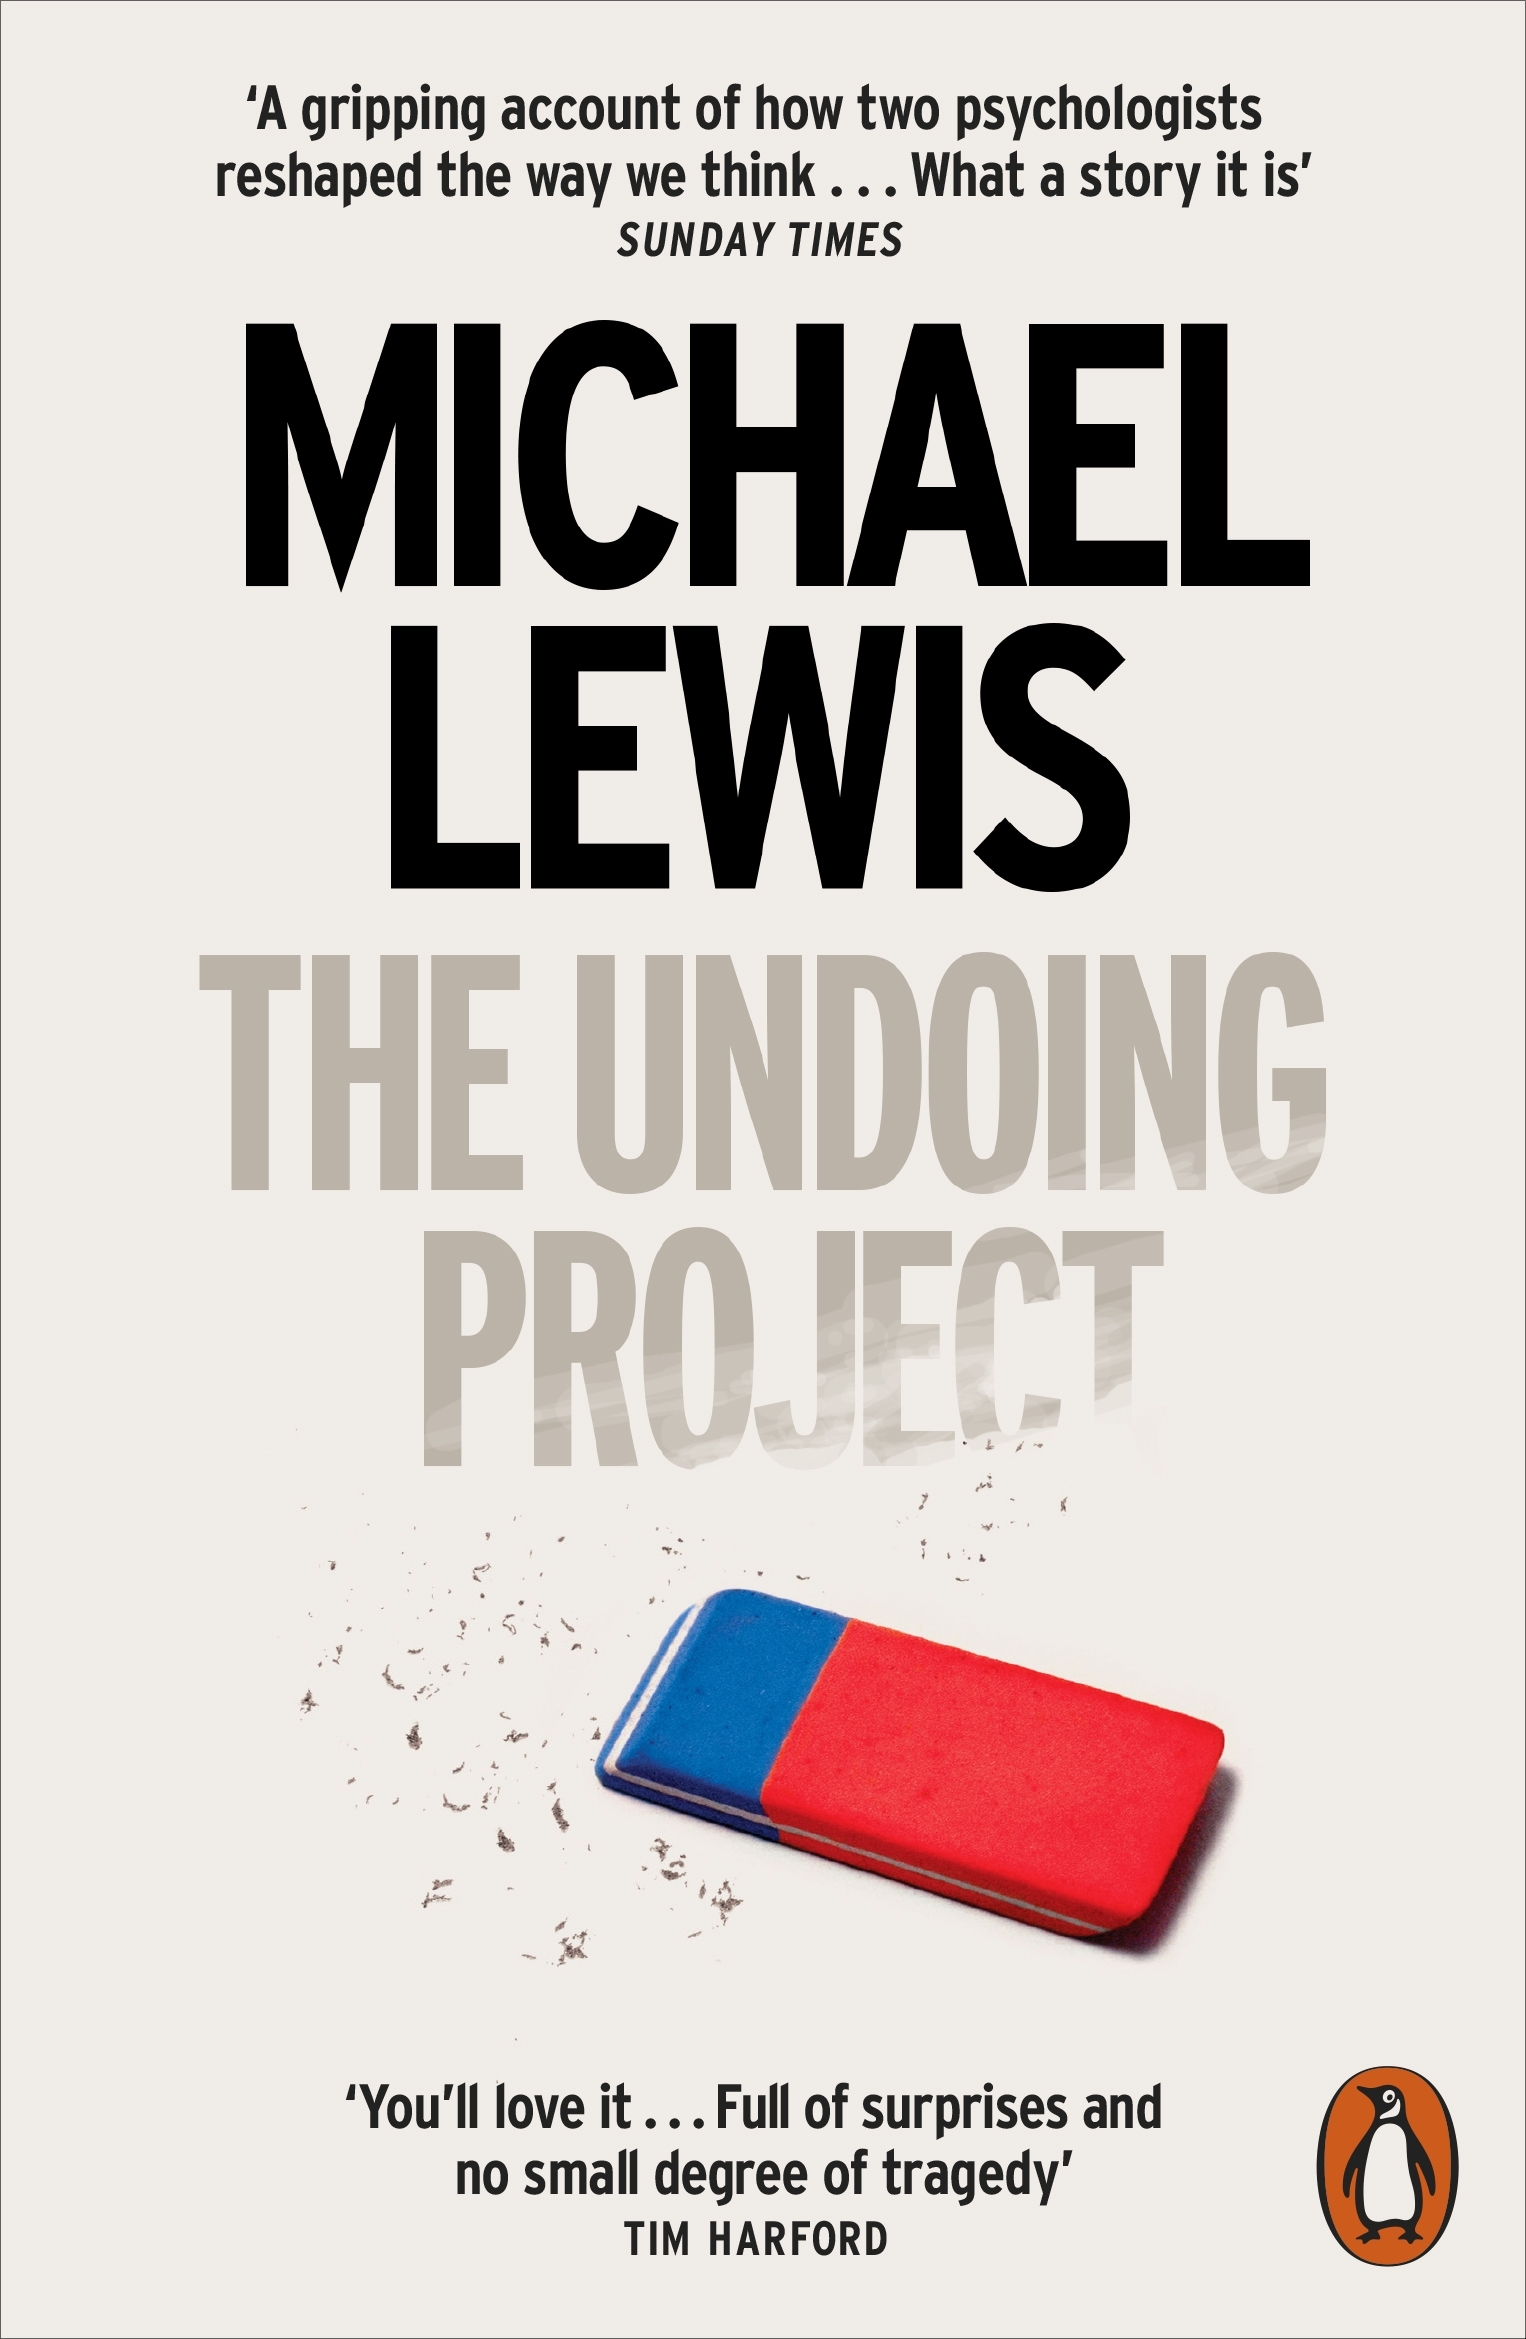 the undoing project book review